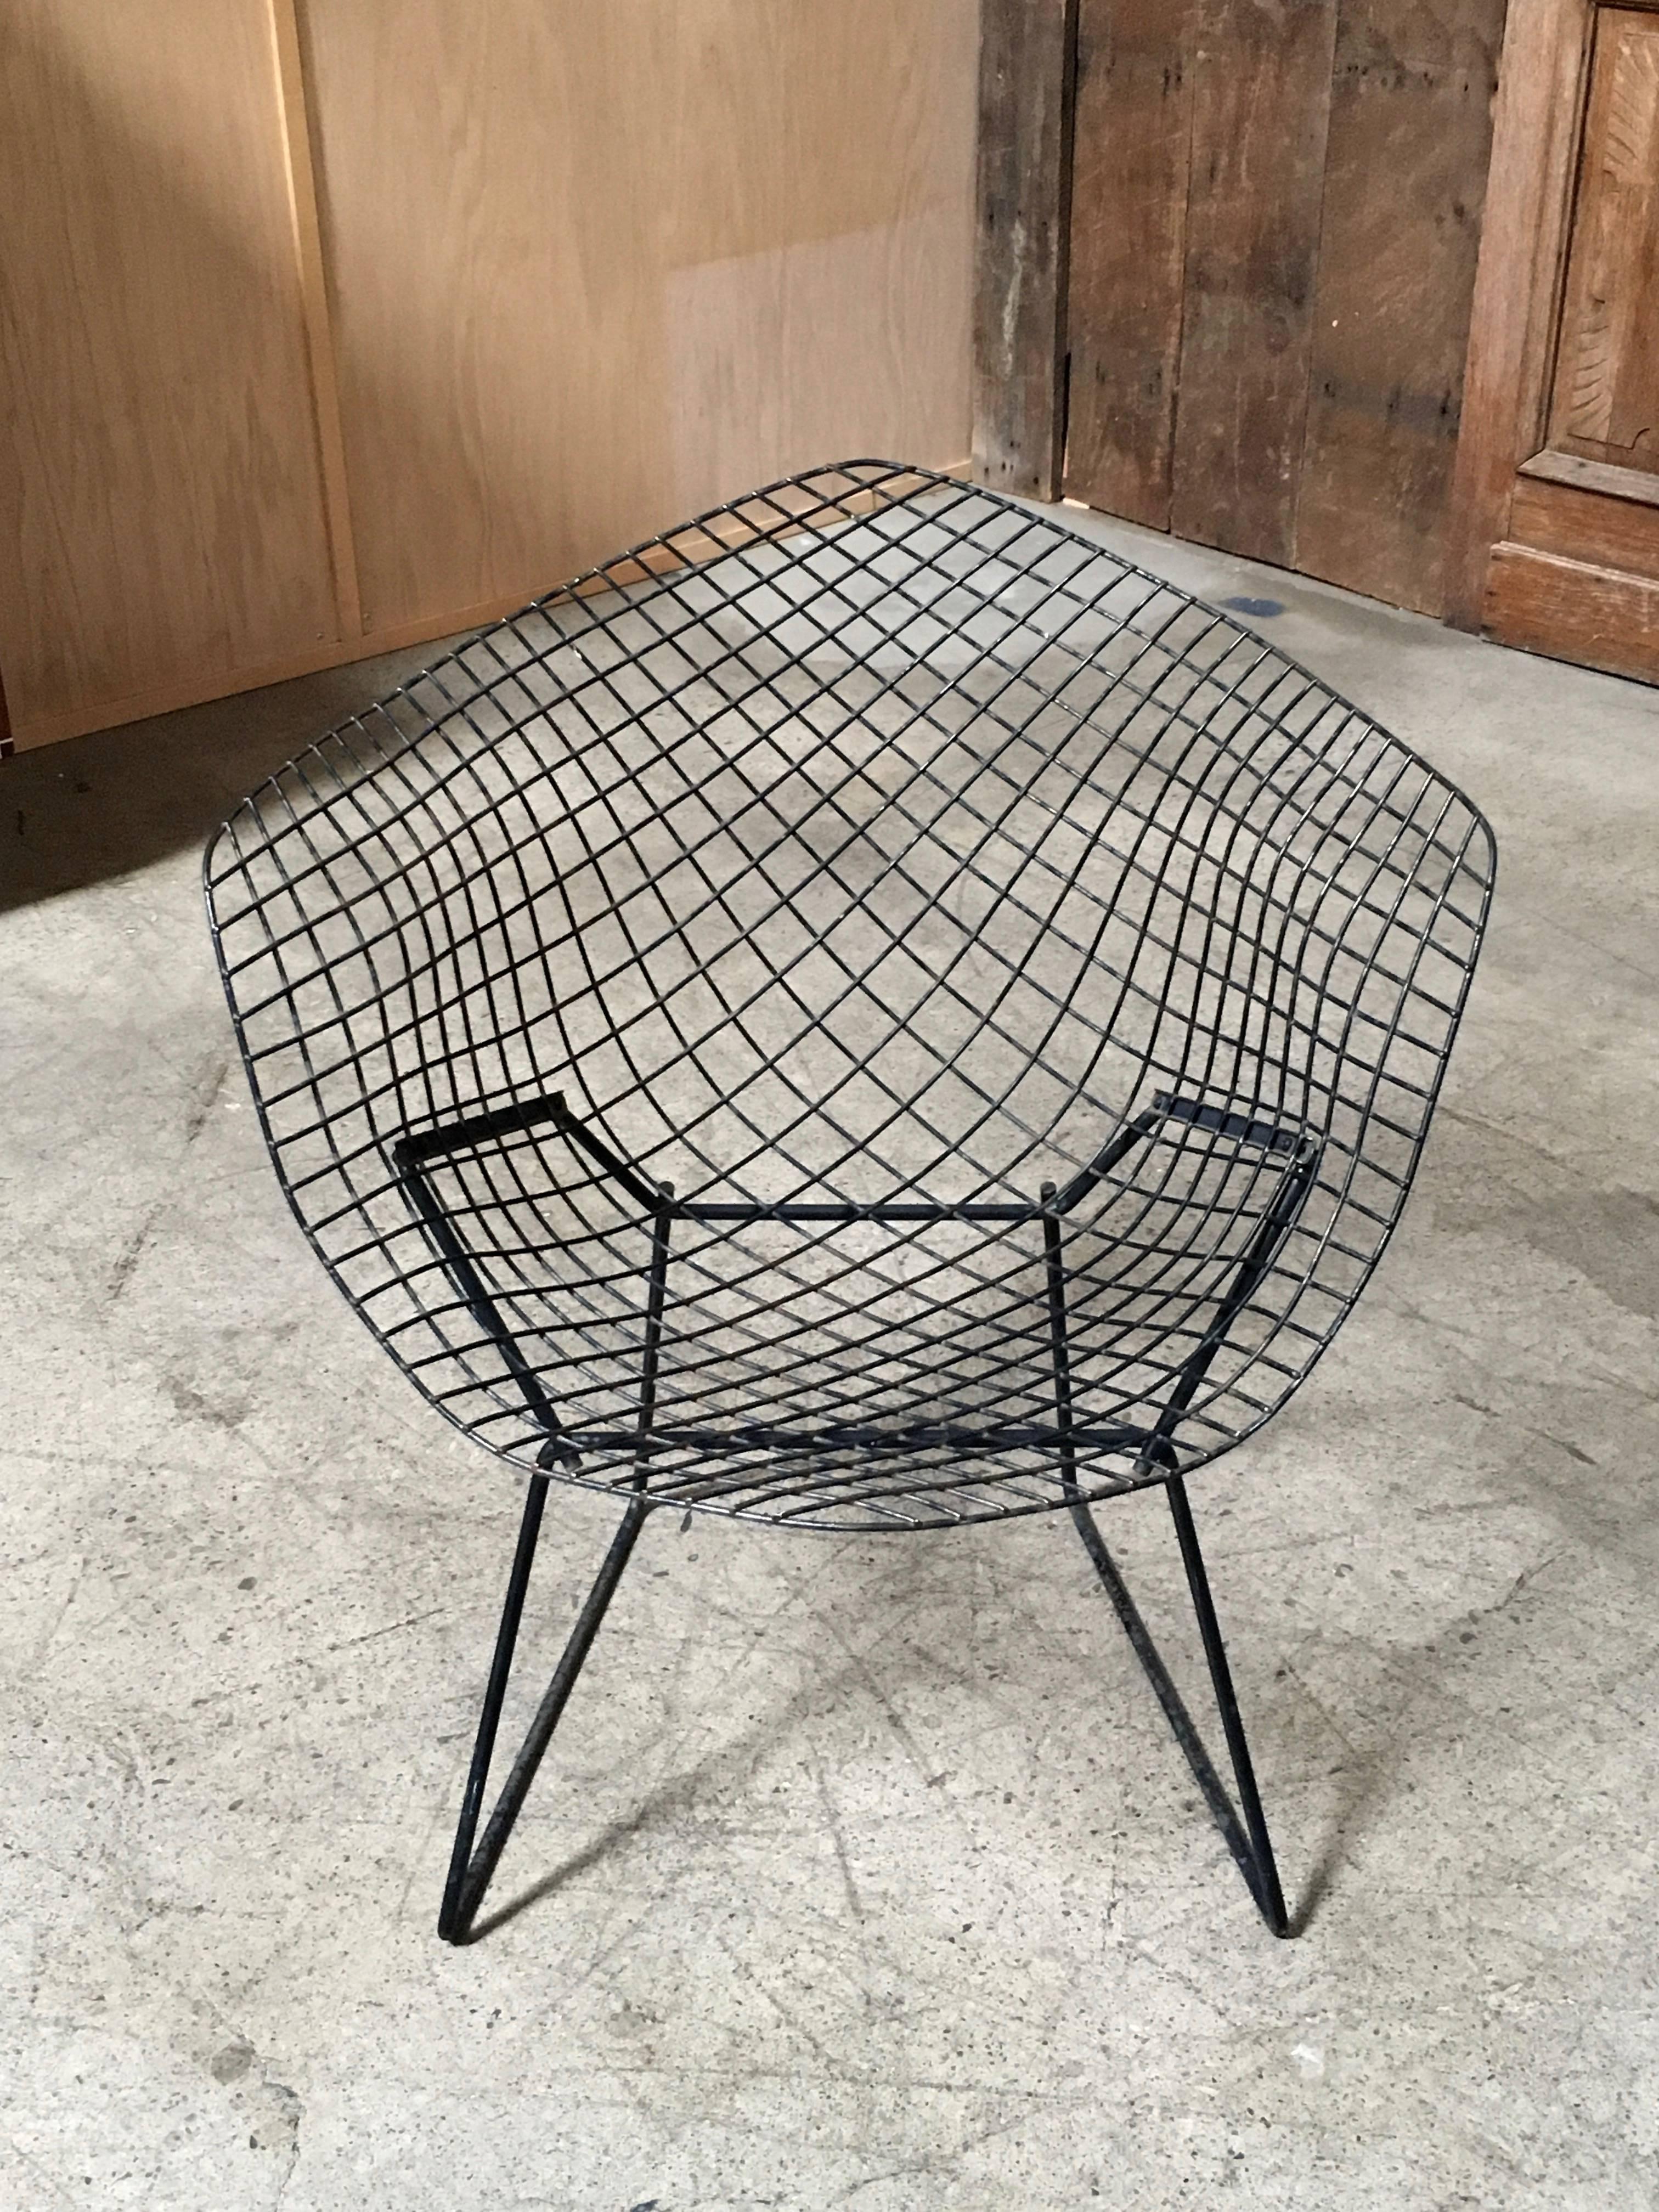 Diamond easy chair designed by Harry Bertoia with nice patina.